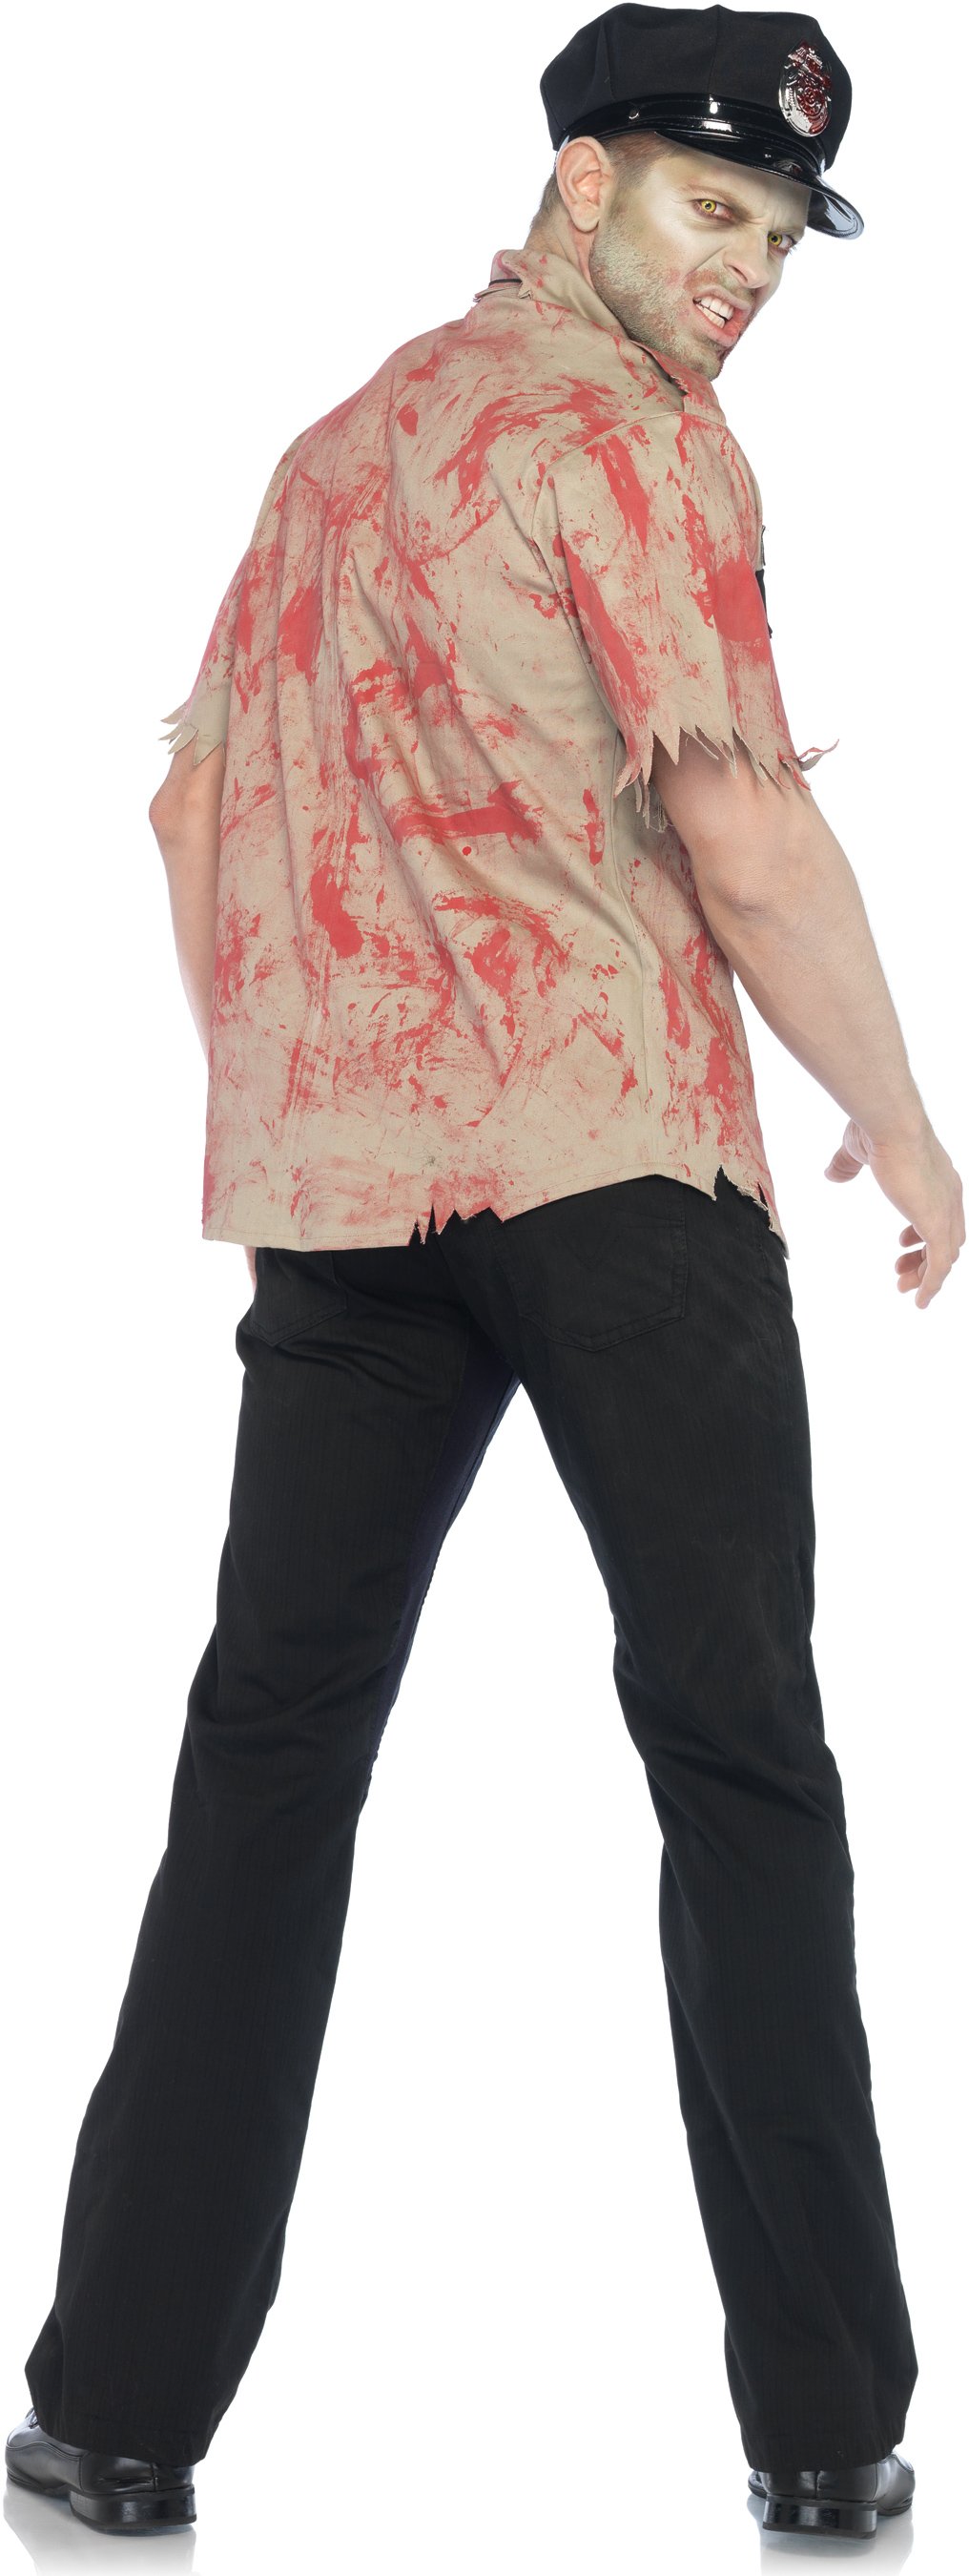 Deputy Dead Adult Costume - Click Image to Close